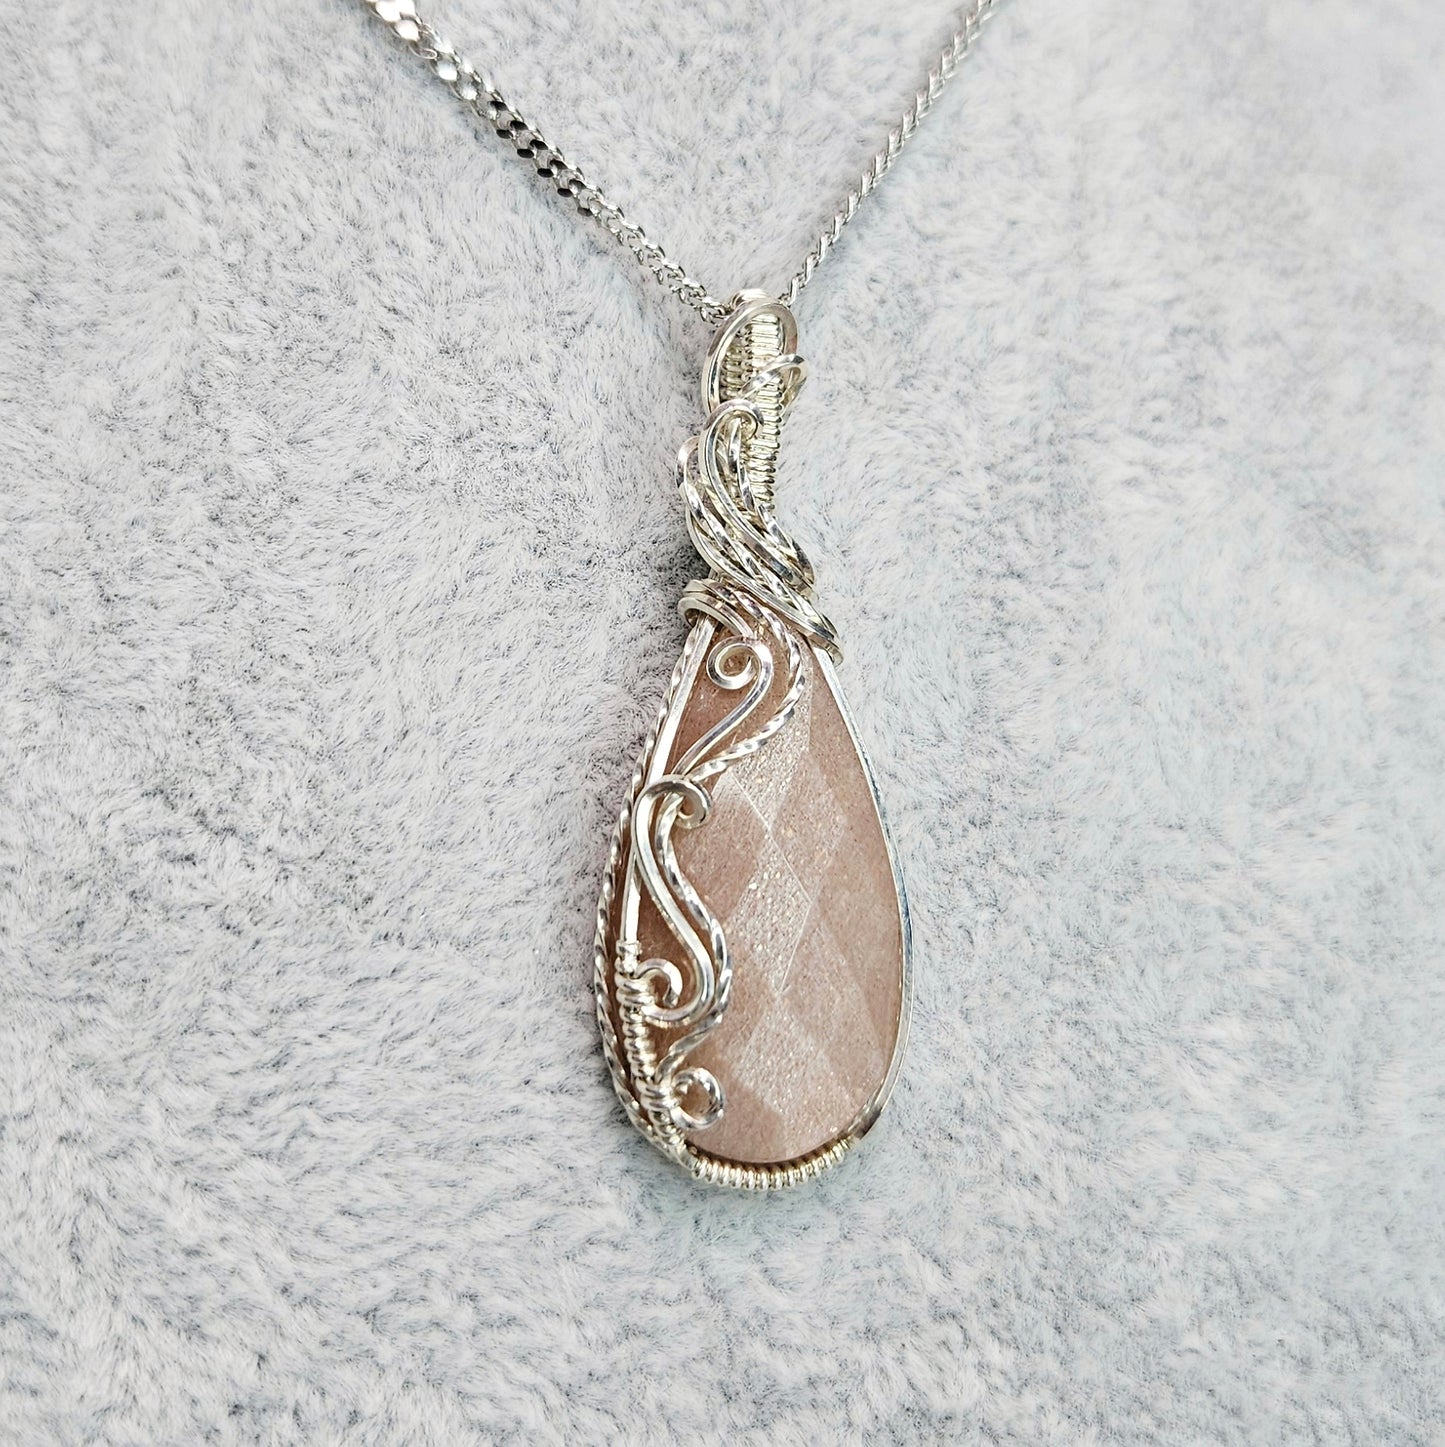 Peach Moonstone in 925 Solid Sterling Silver Handmade Wire-Wrap Pendant